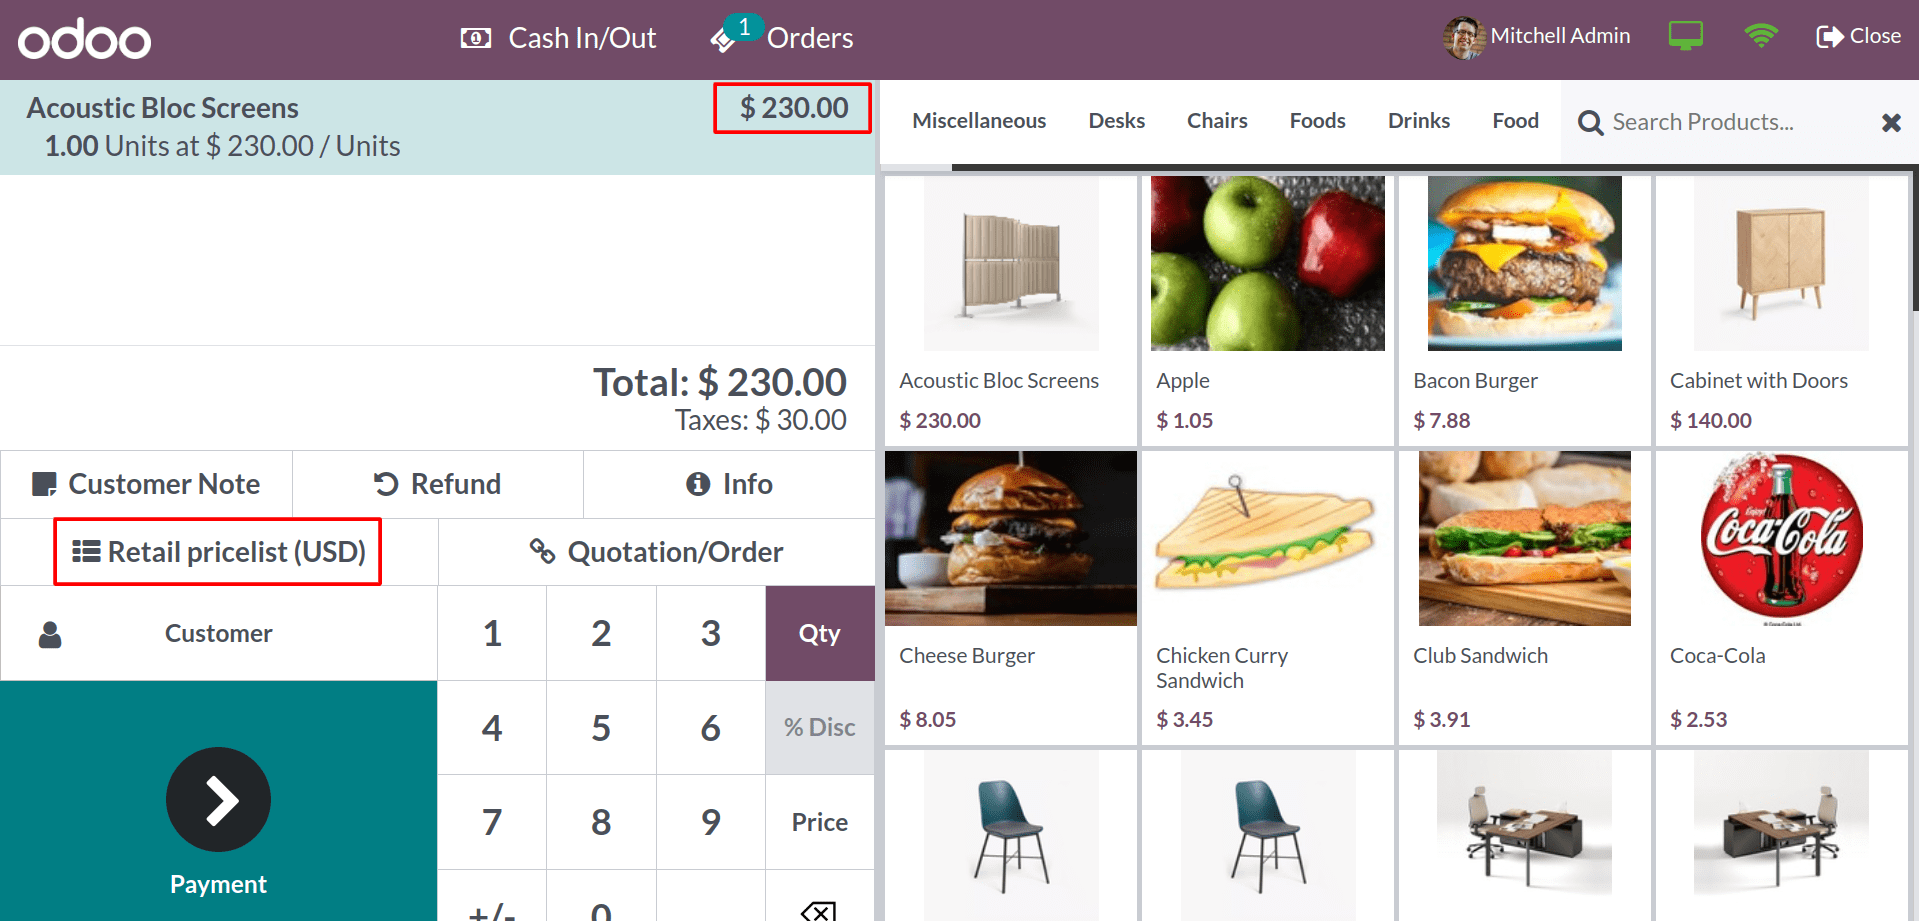 what-are-the-benefits-of-pricelist-in-restaurants-using-odoo-16-pos-6-cybrosys